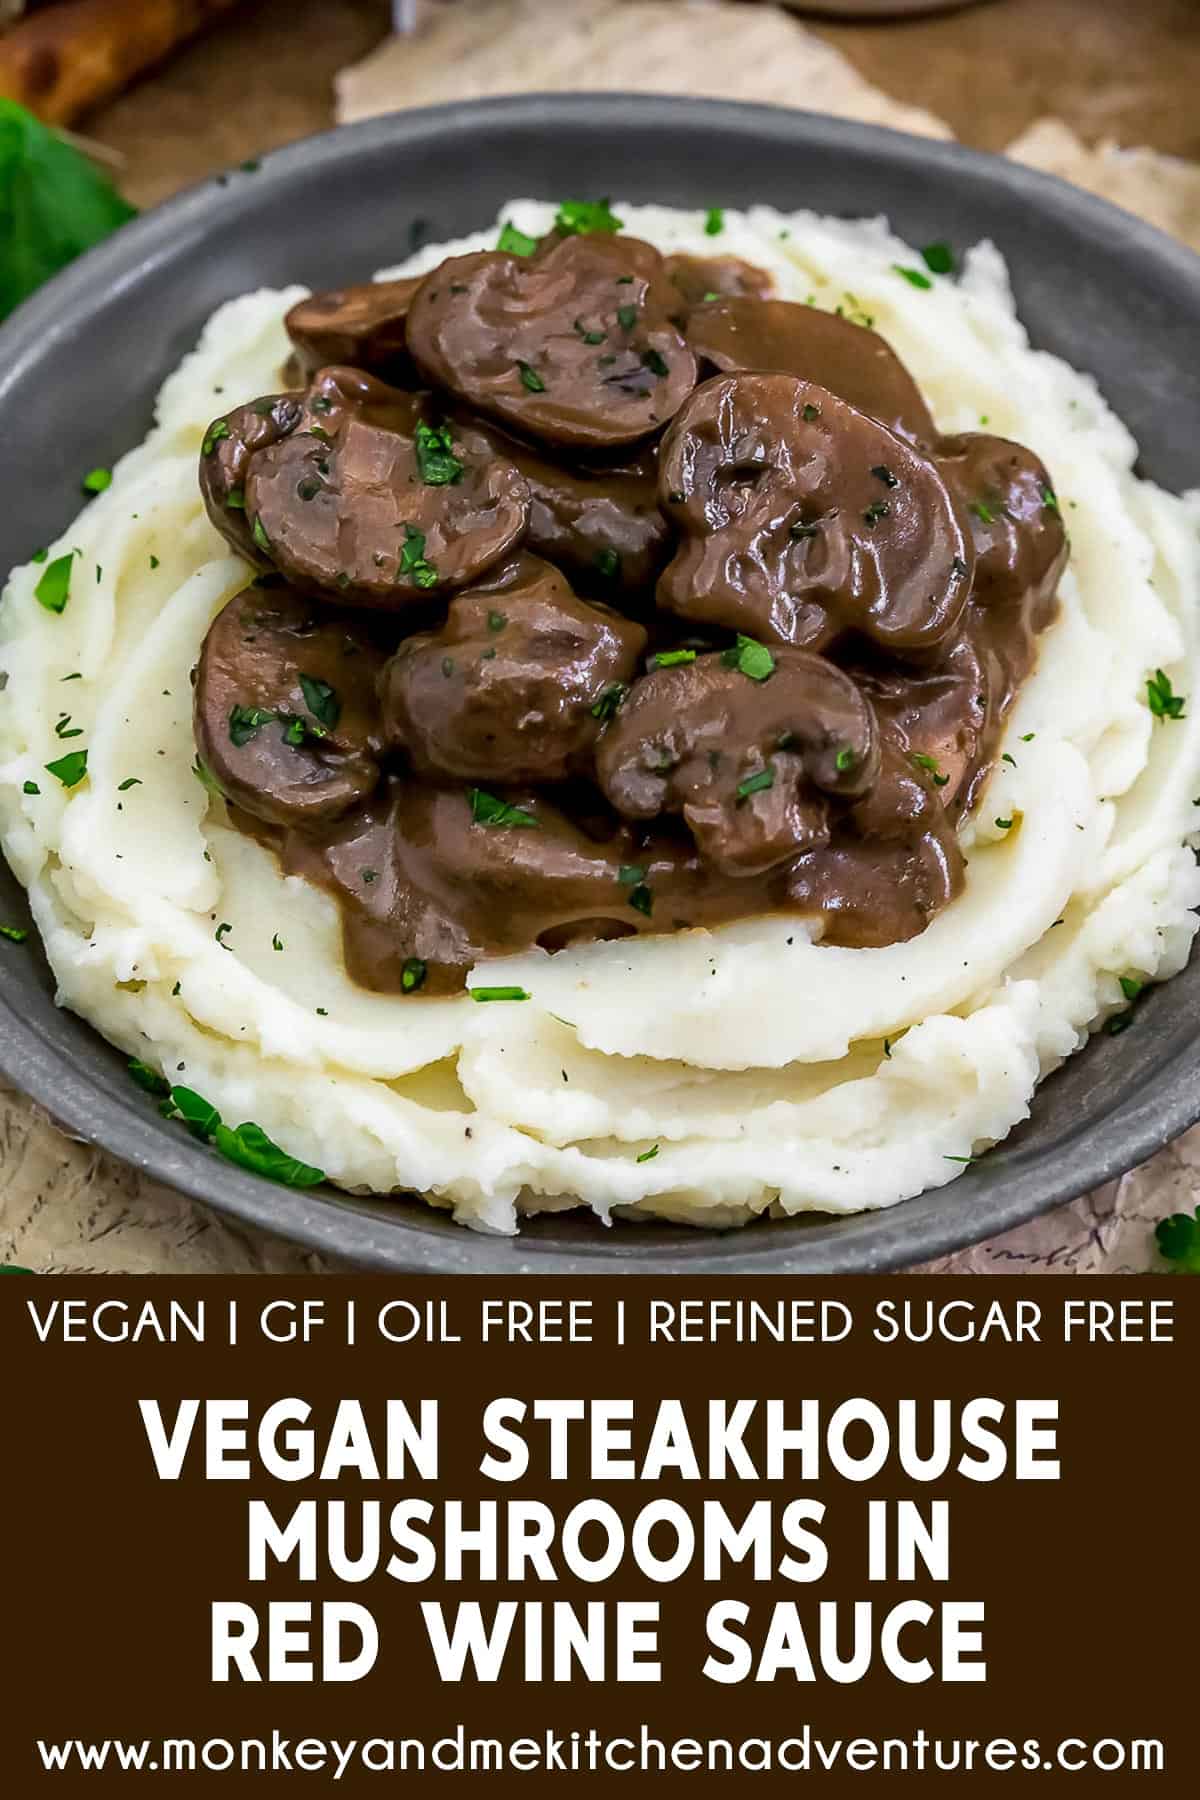 Vegan Steakhouse Mushrooms in Red Wine Sauce with text description